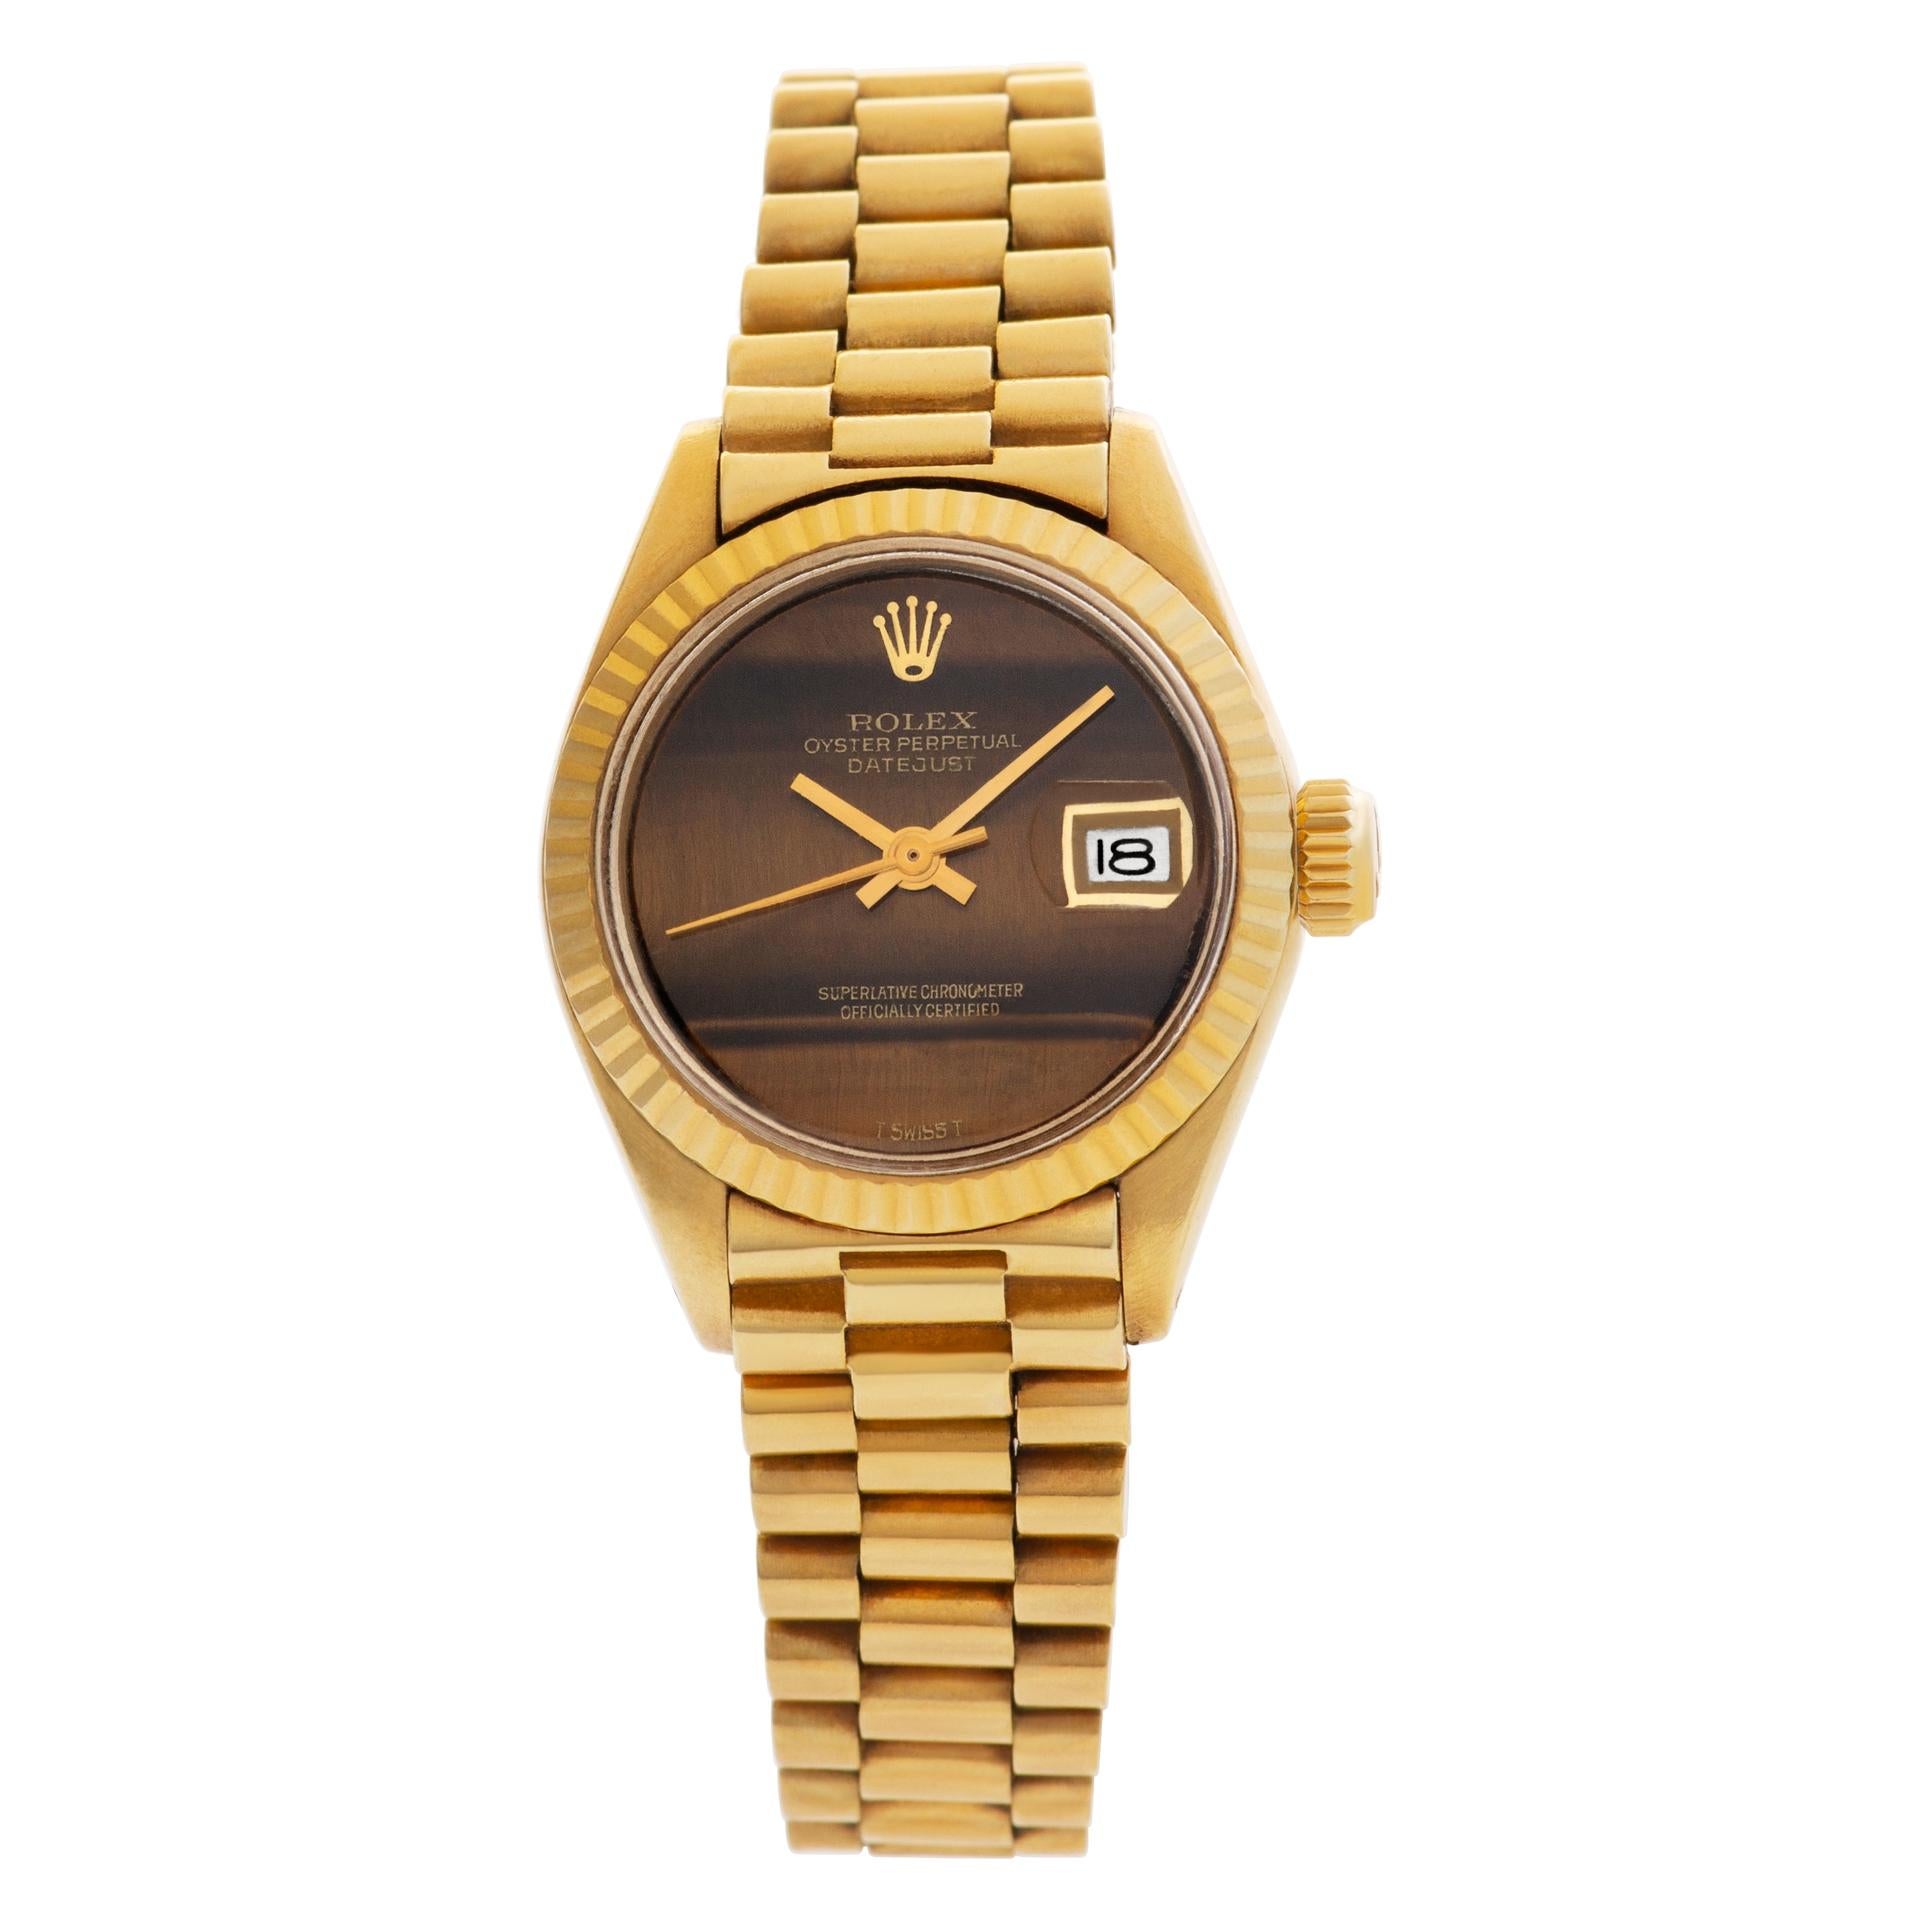 YOUR PRICE: $11,700.00

Rolex Datejust with original Tiger eye dial in 18k yellow gold. Auto w/ sweep seconds and date. 26 mm case size. Ref 6917. Circa 1973. 

Certified preowned Vintage Rolex Datejust reference 6917 watch is made out of  18k